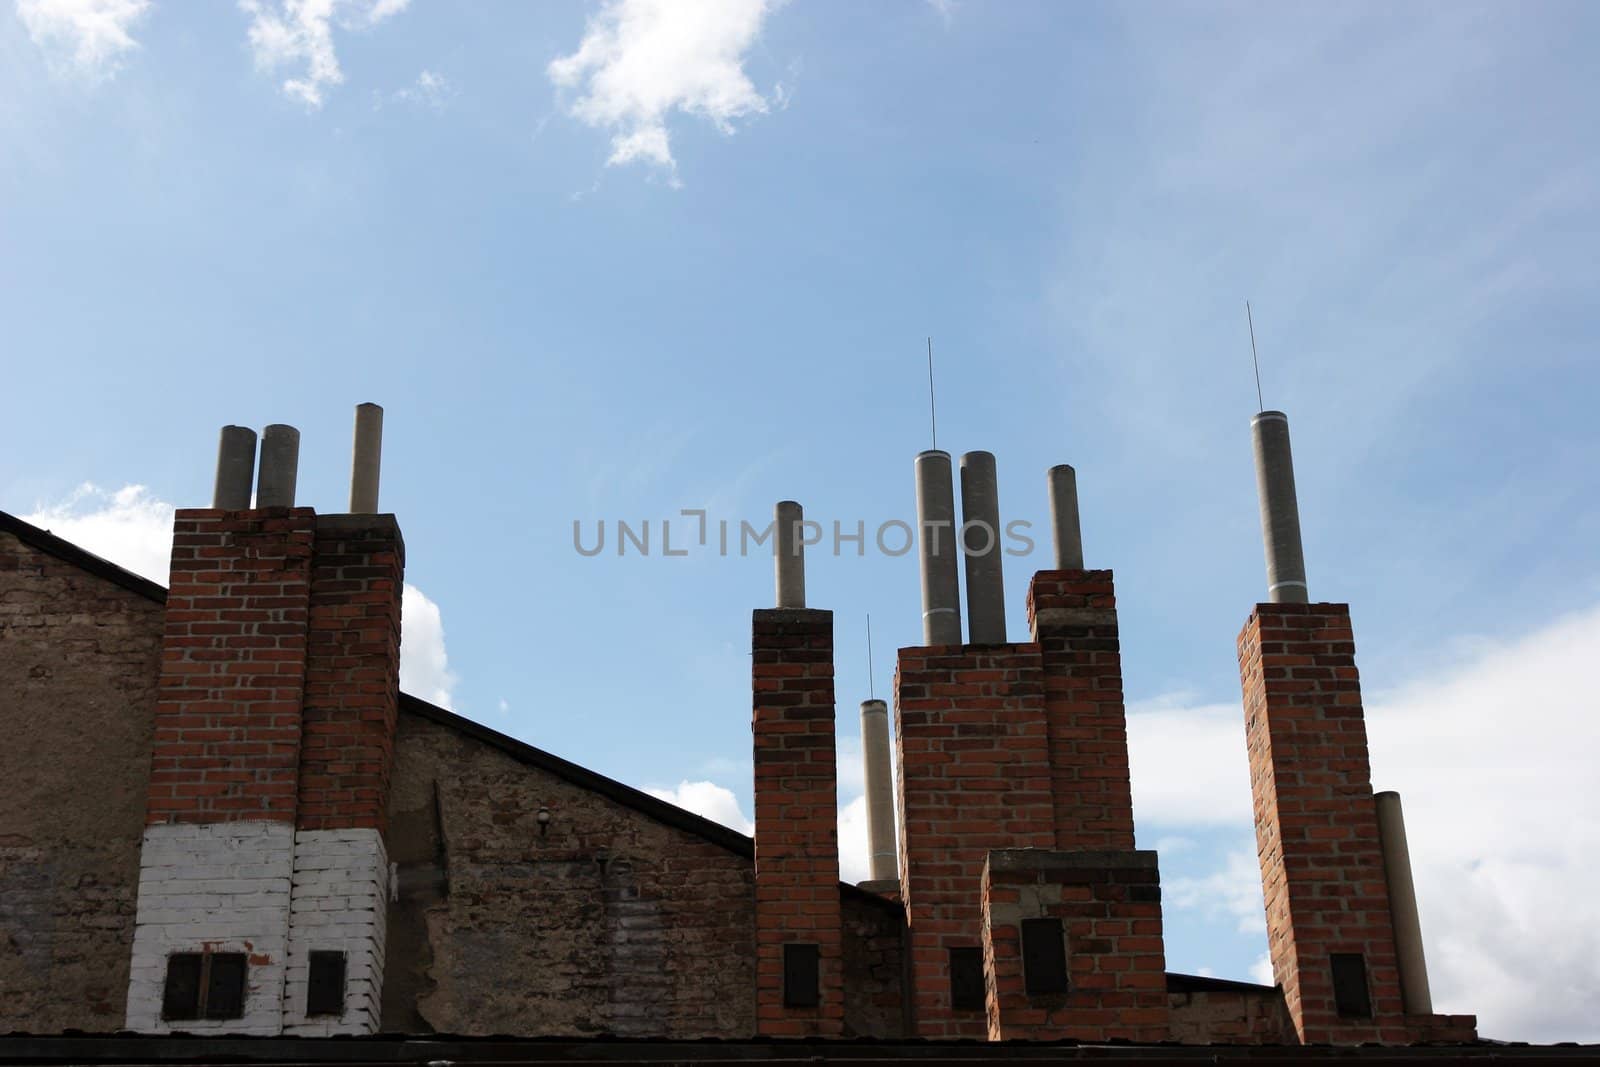 Many of brick chimneys on the top of the house